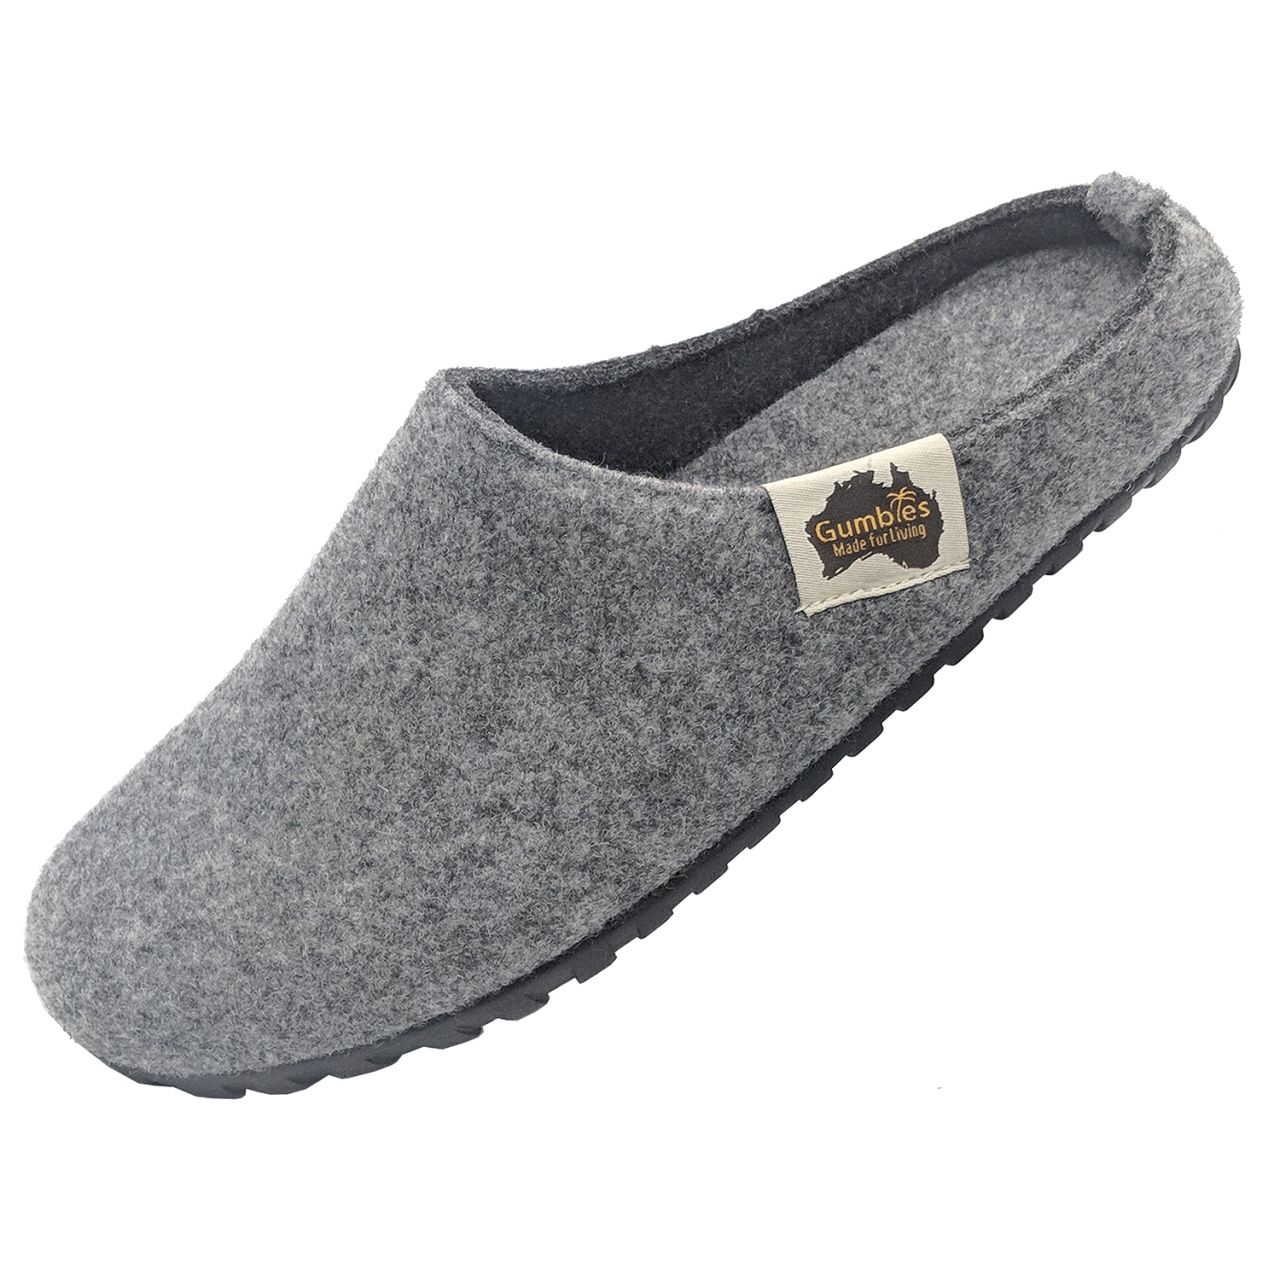 GUMBIES Hausschuhe "Outback Slipper" Grey & Charcoal